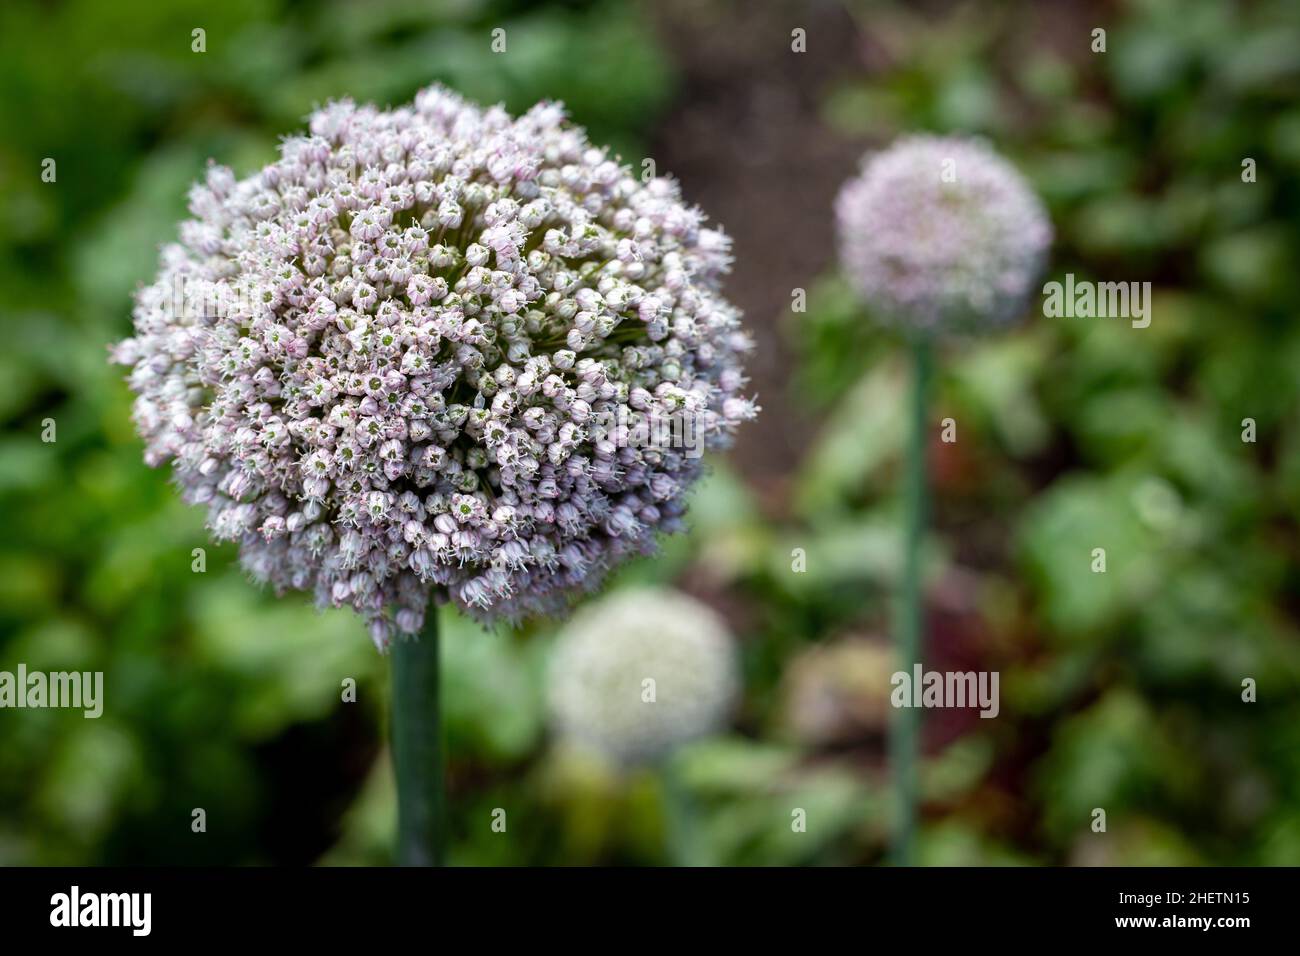 Leeks grown for their seeds, produce beautiful spherical mauve flowers, which are attractive to bees. They are also desired to sprinkle through salads Stock Photo